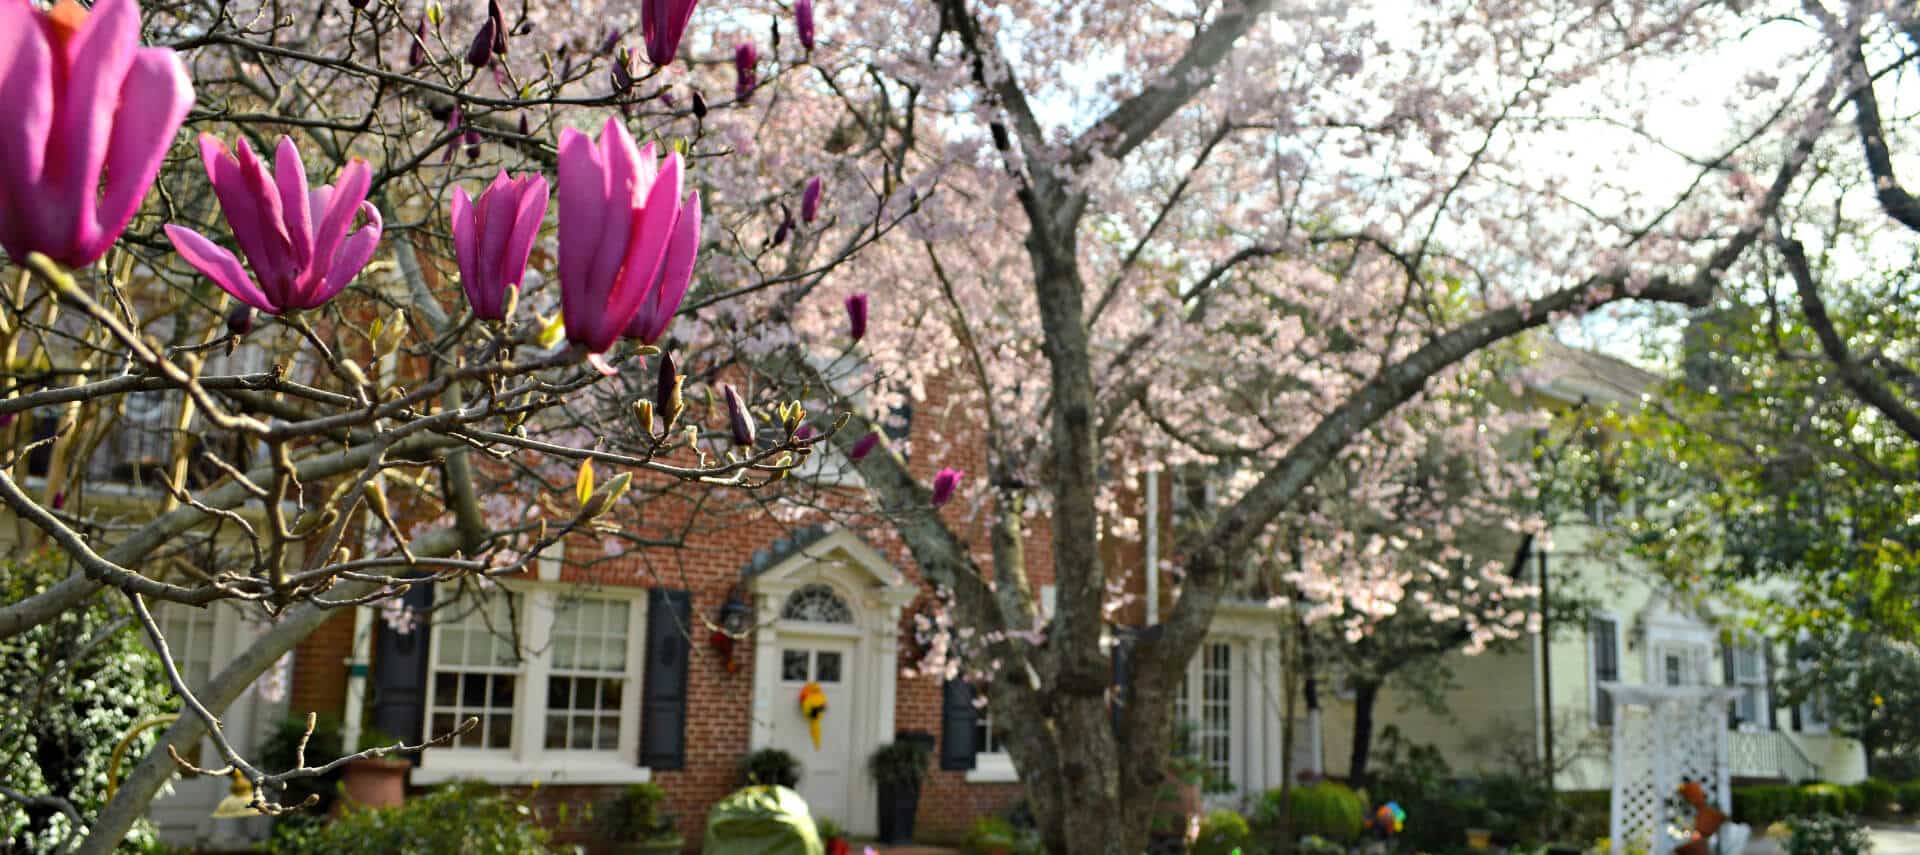 Large brick home fronted by tree blooming with pink flowers.